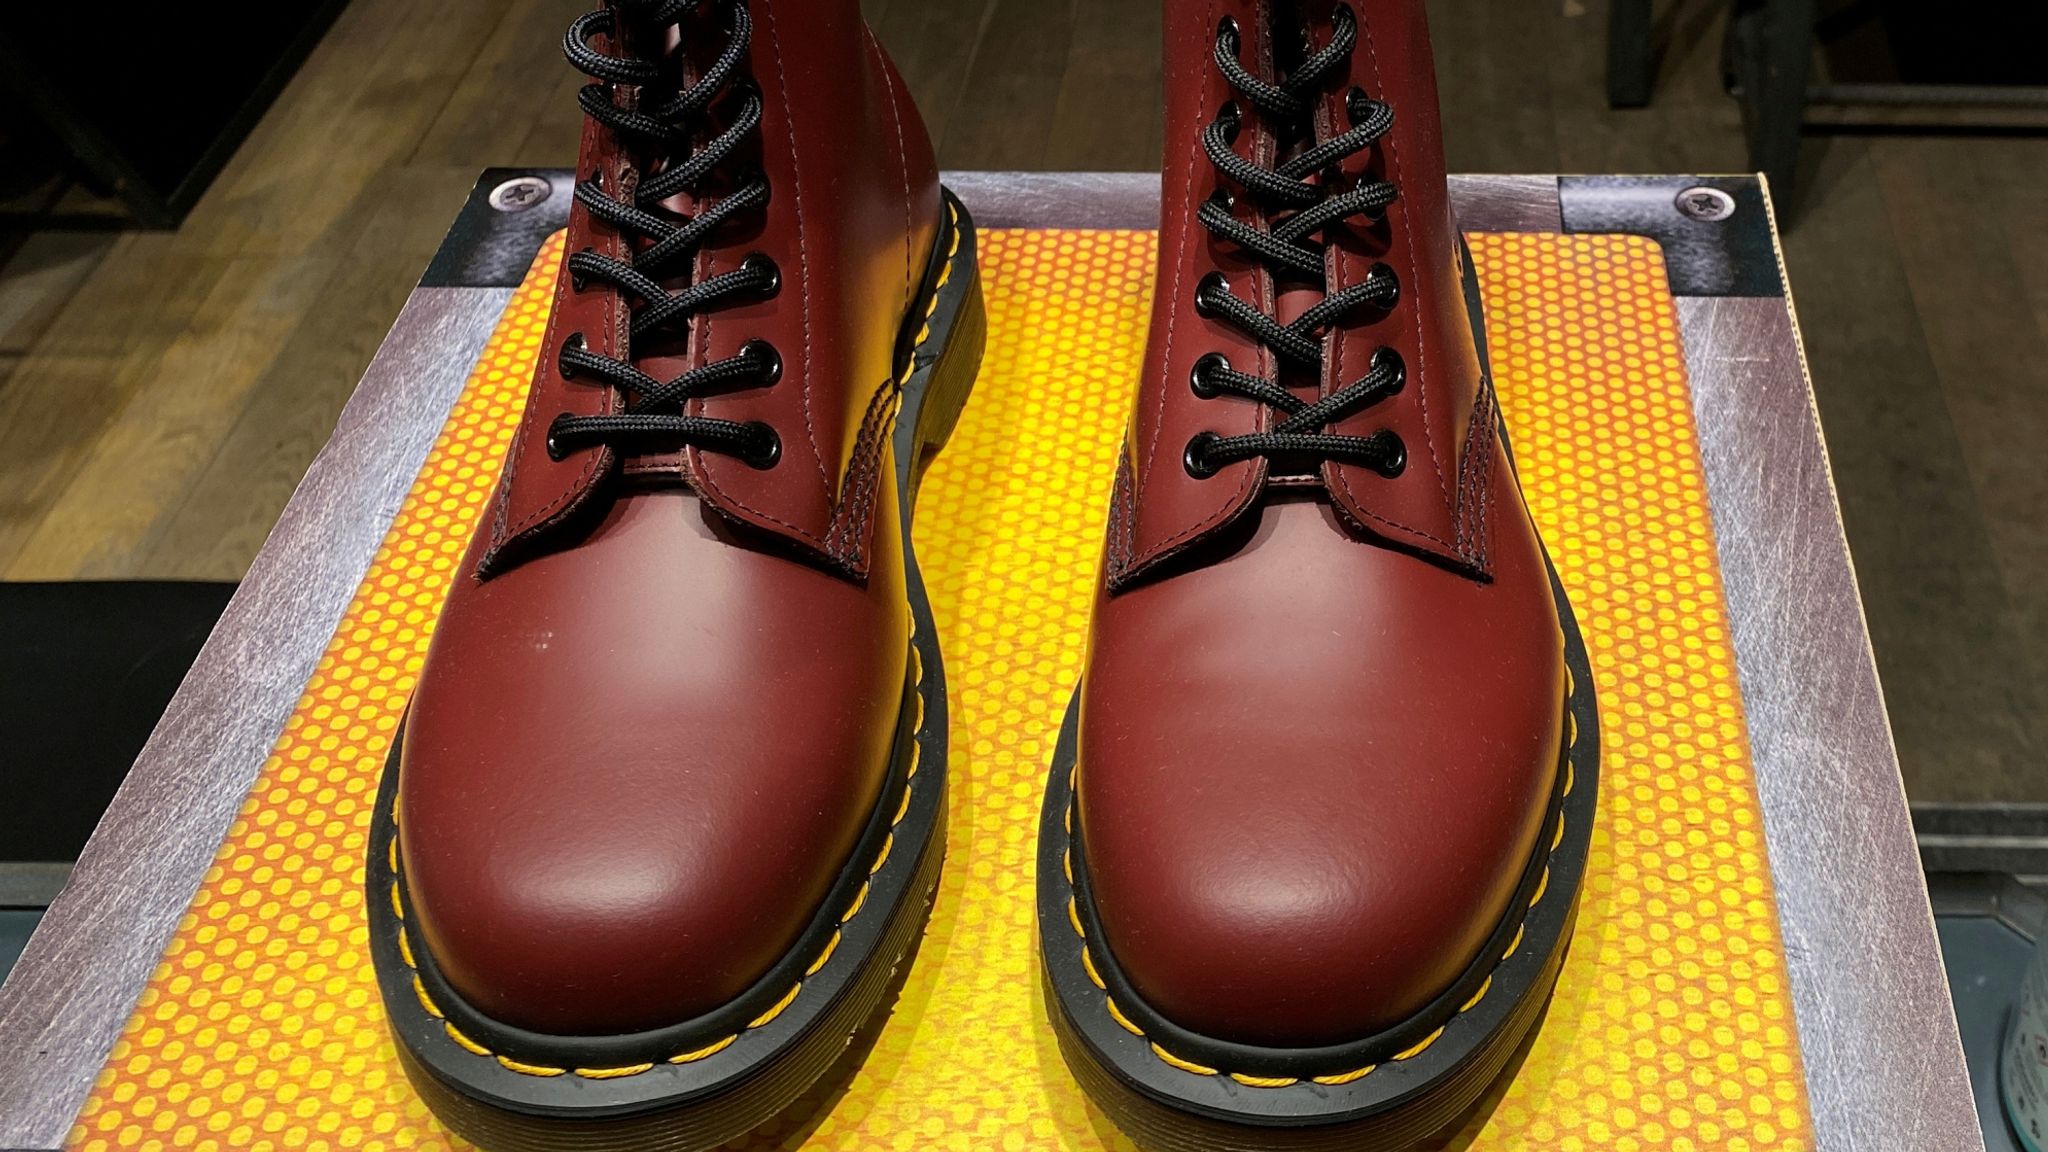 who sells dr martens boots